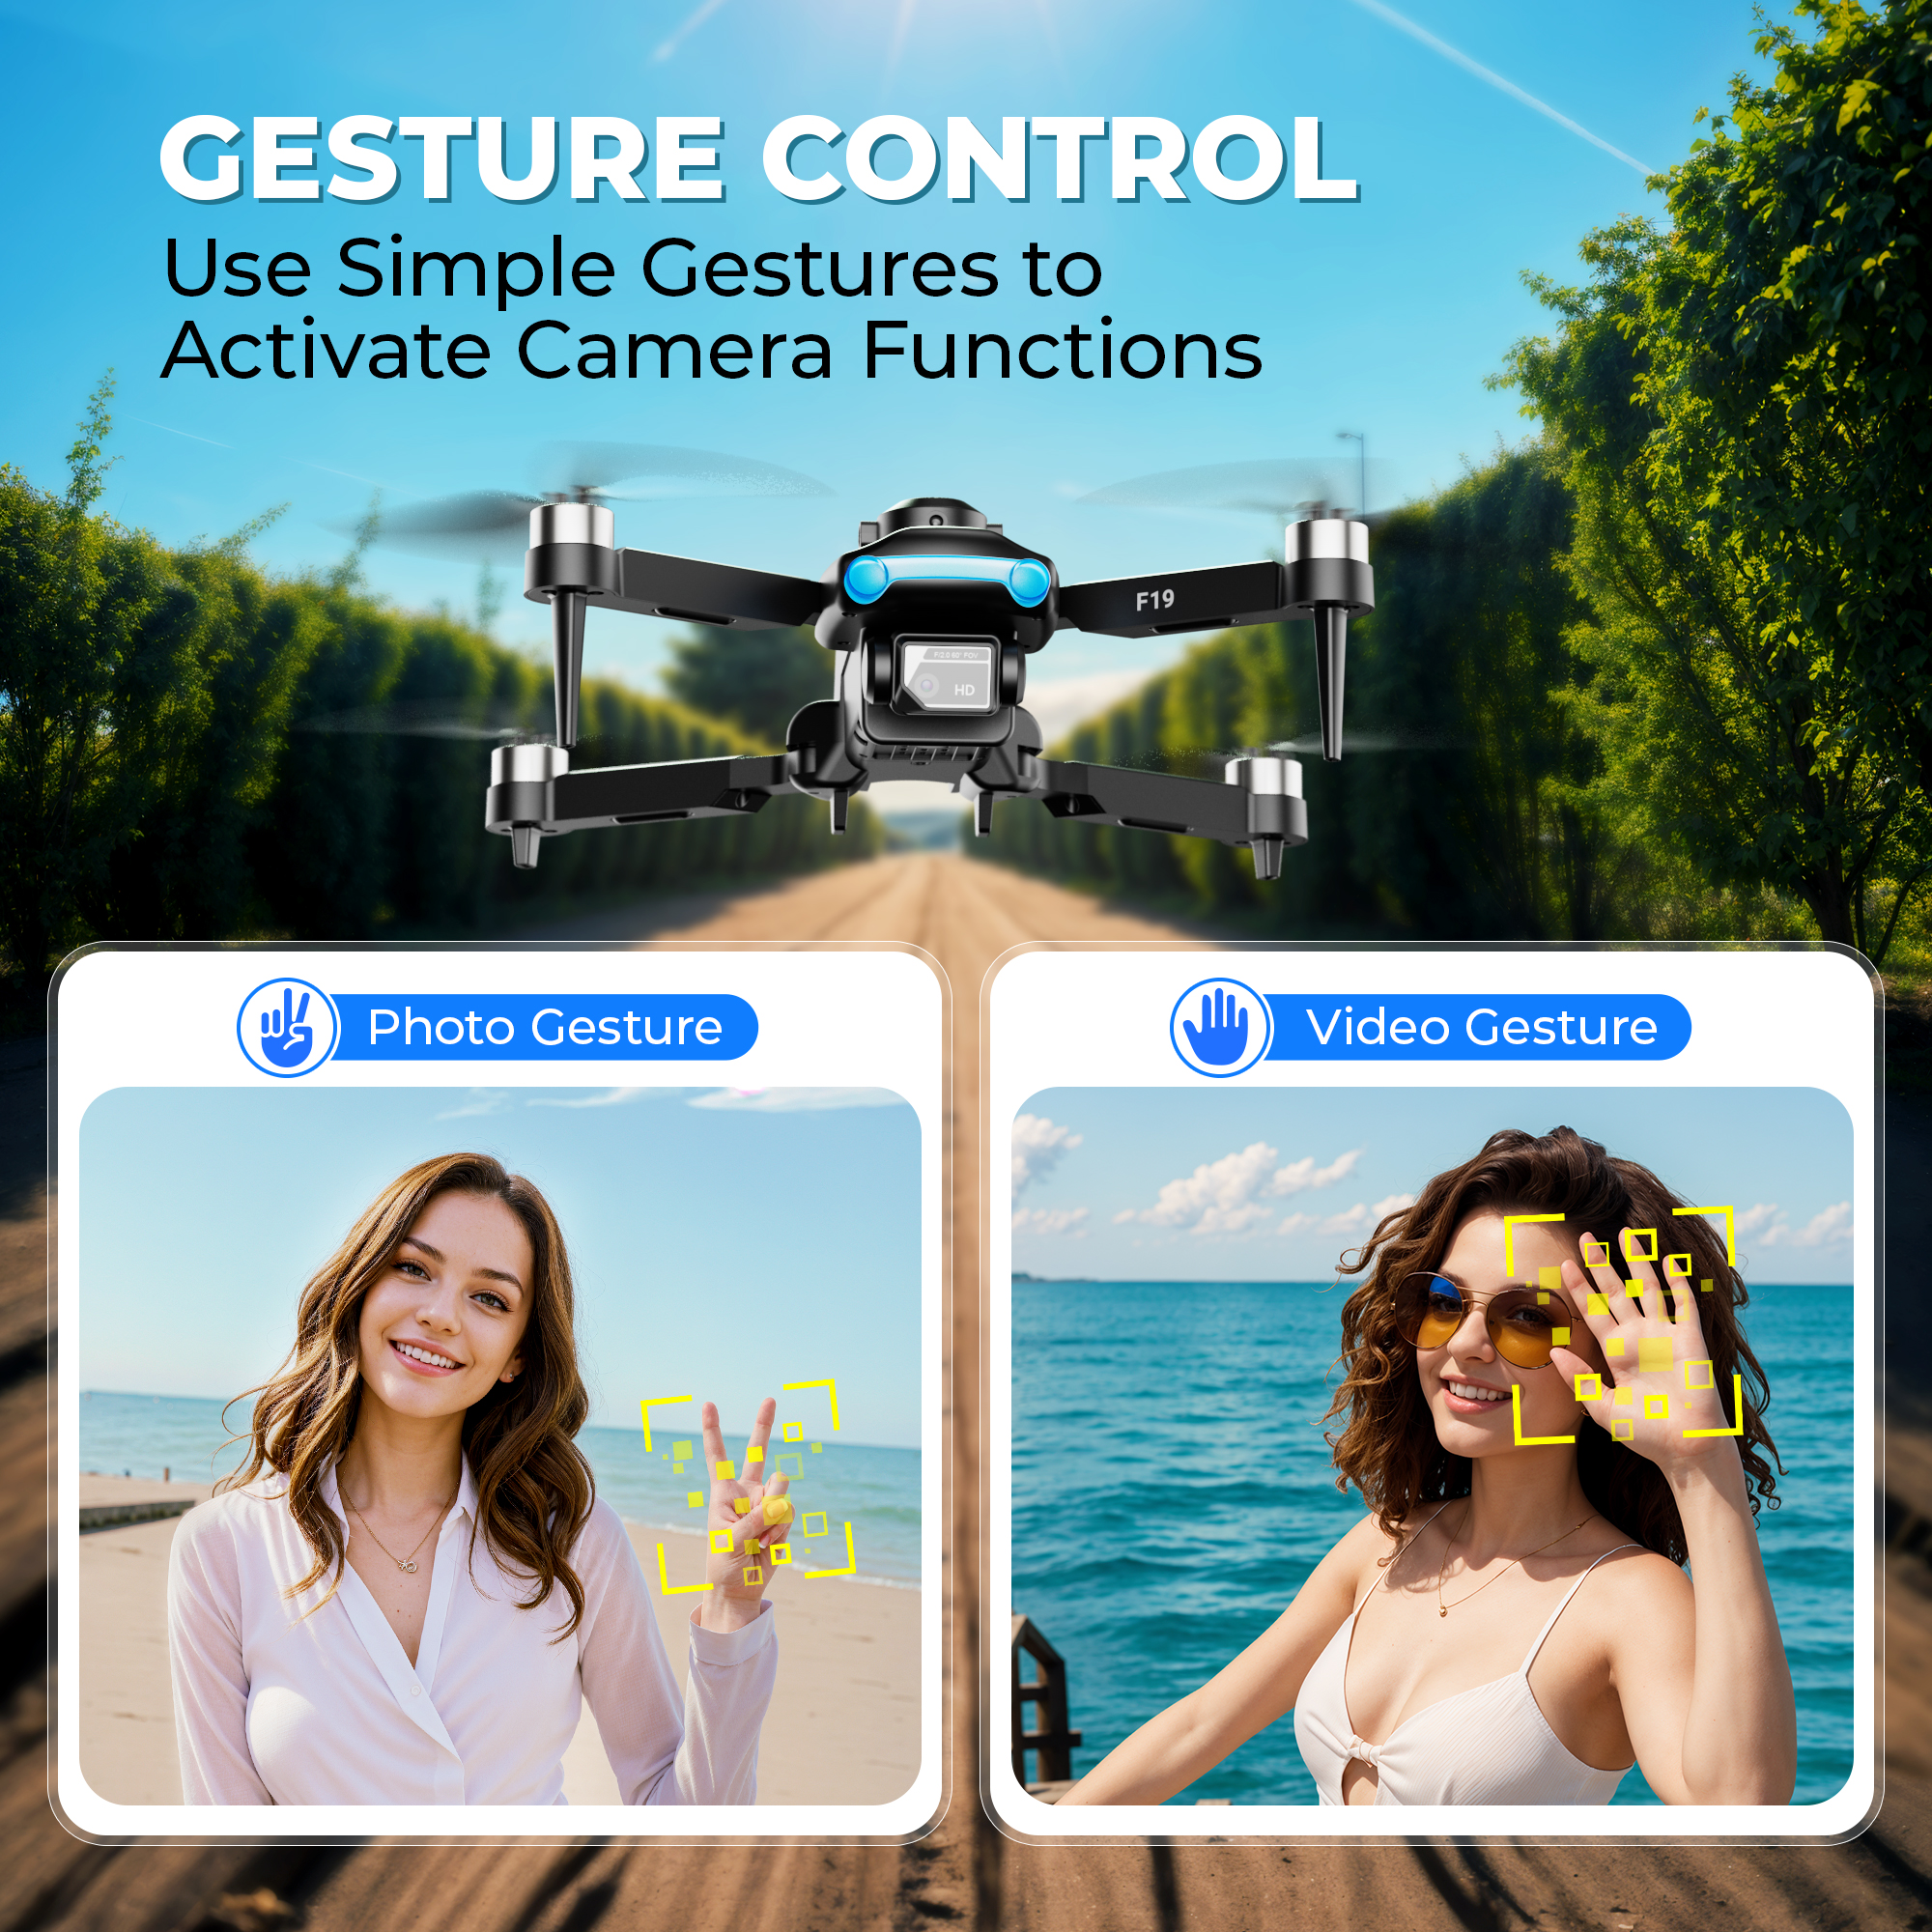 Contixo F19 Drone with 1080P Camera for Adults & Kids – RC Foldable  Quadcopter with Four-Way Obstacle Avoidance, Follow Me, Waypoint Fly,  Altitude